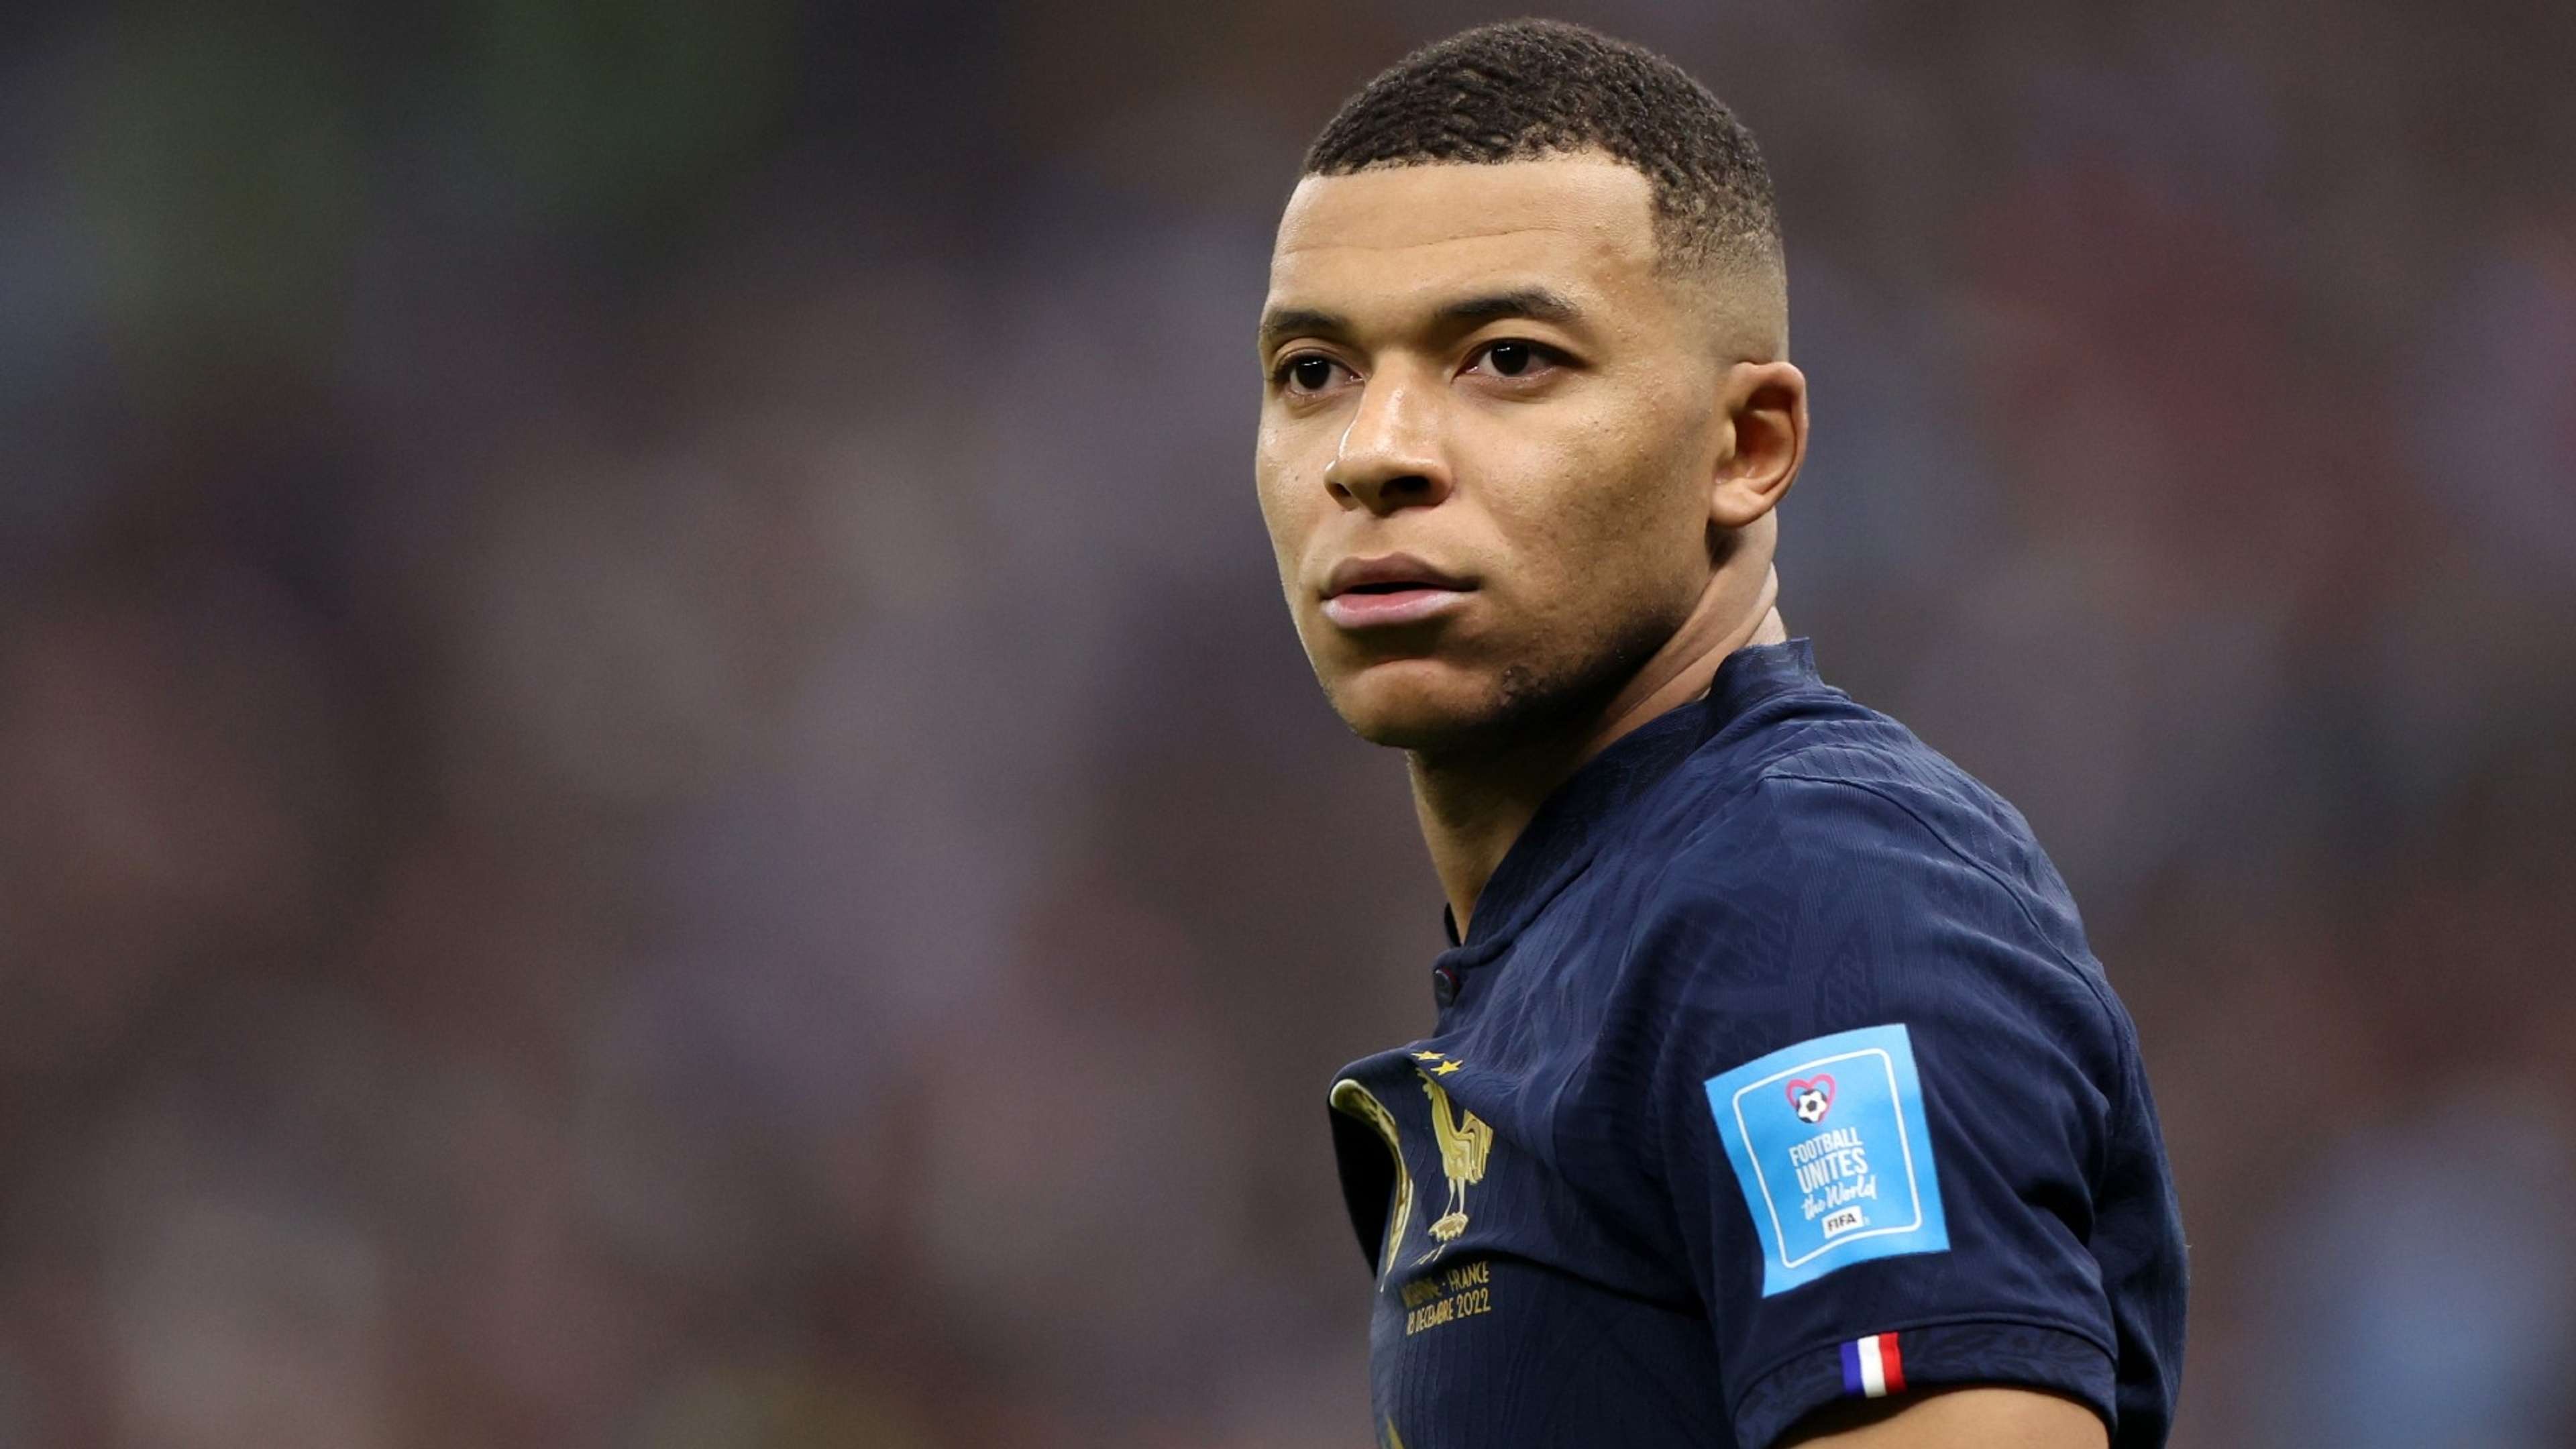 Mbappe-France-2022-World-Cup